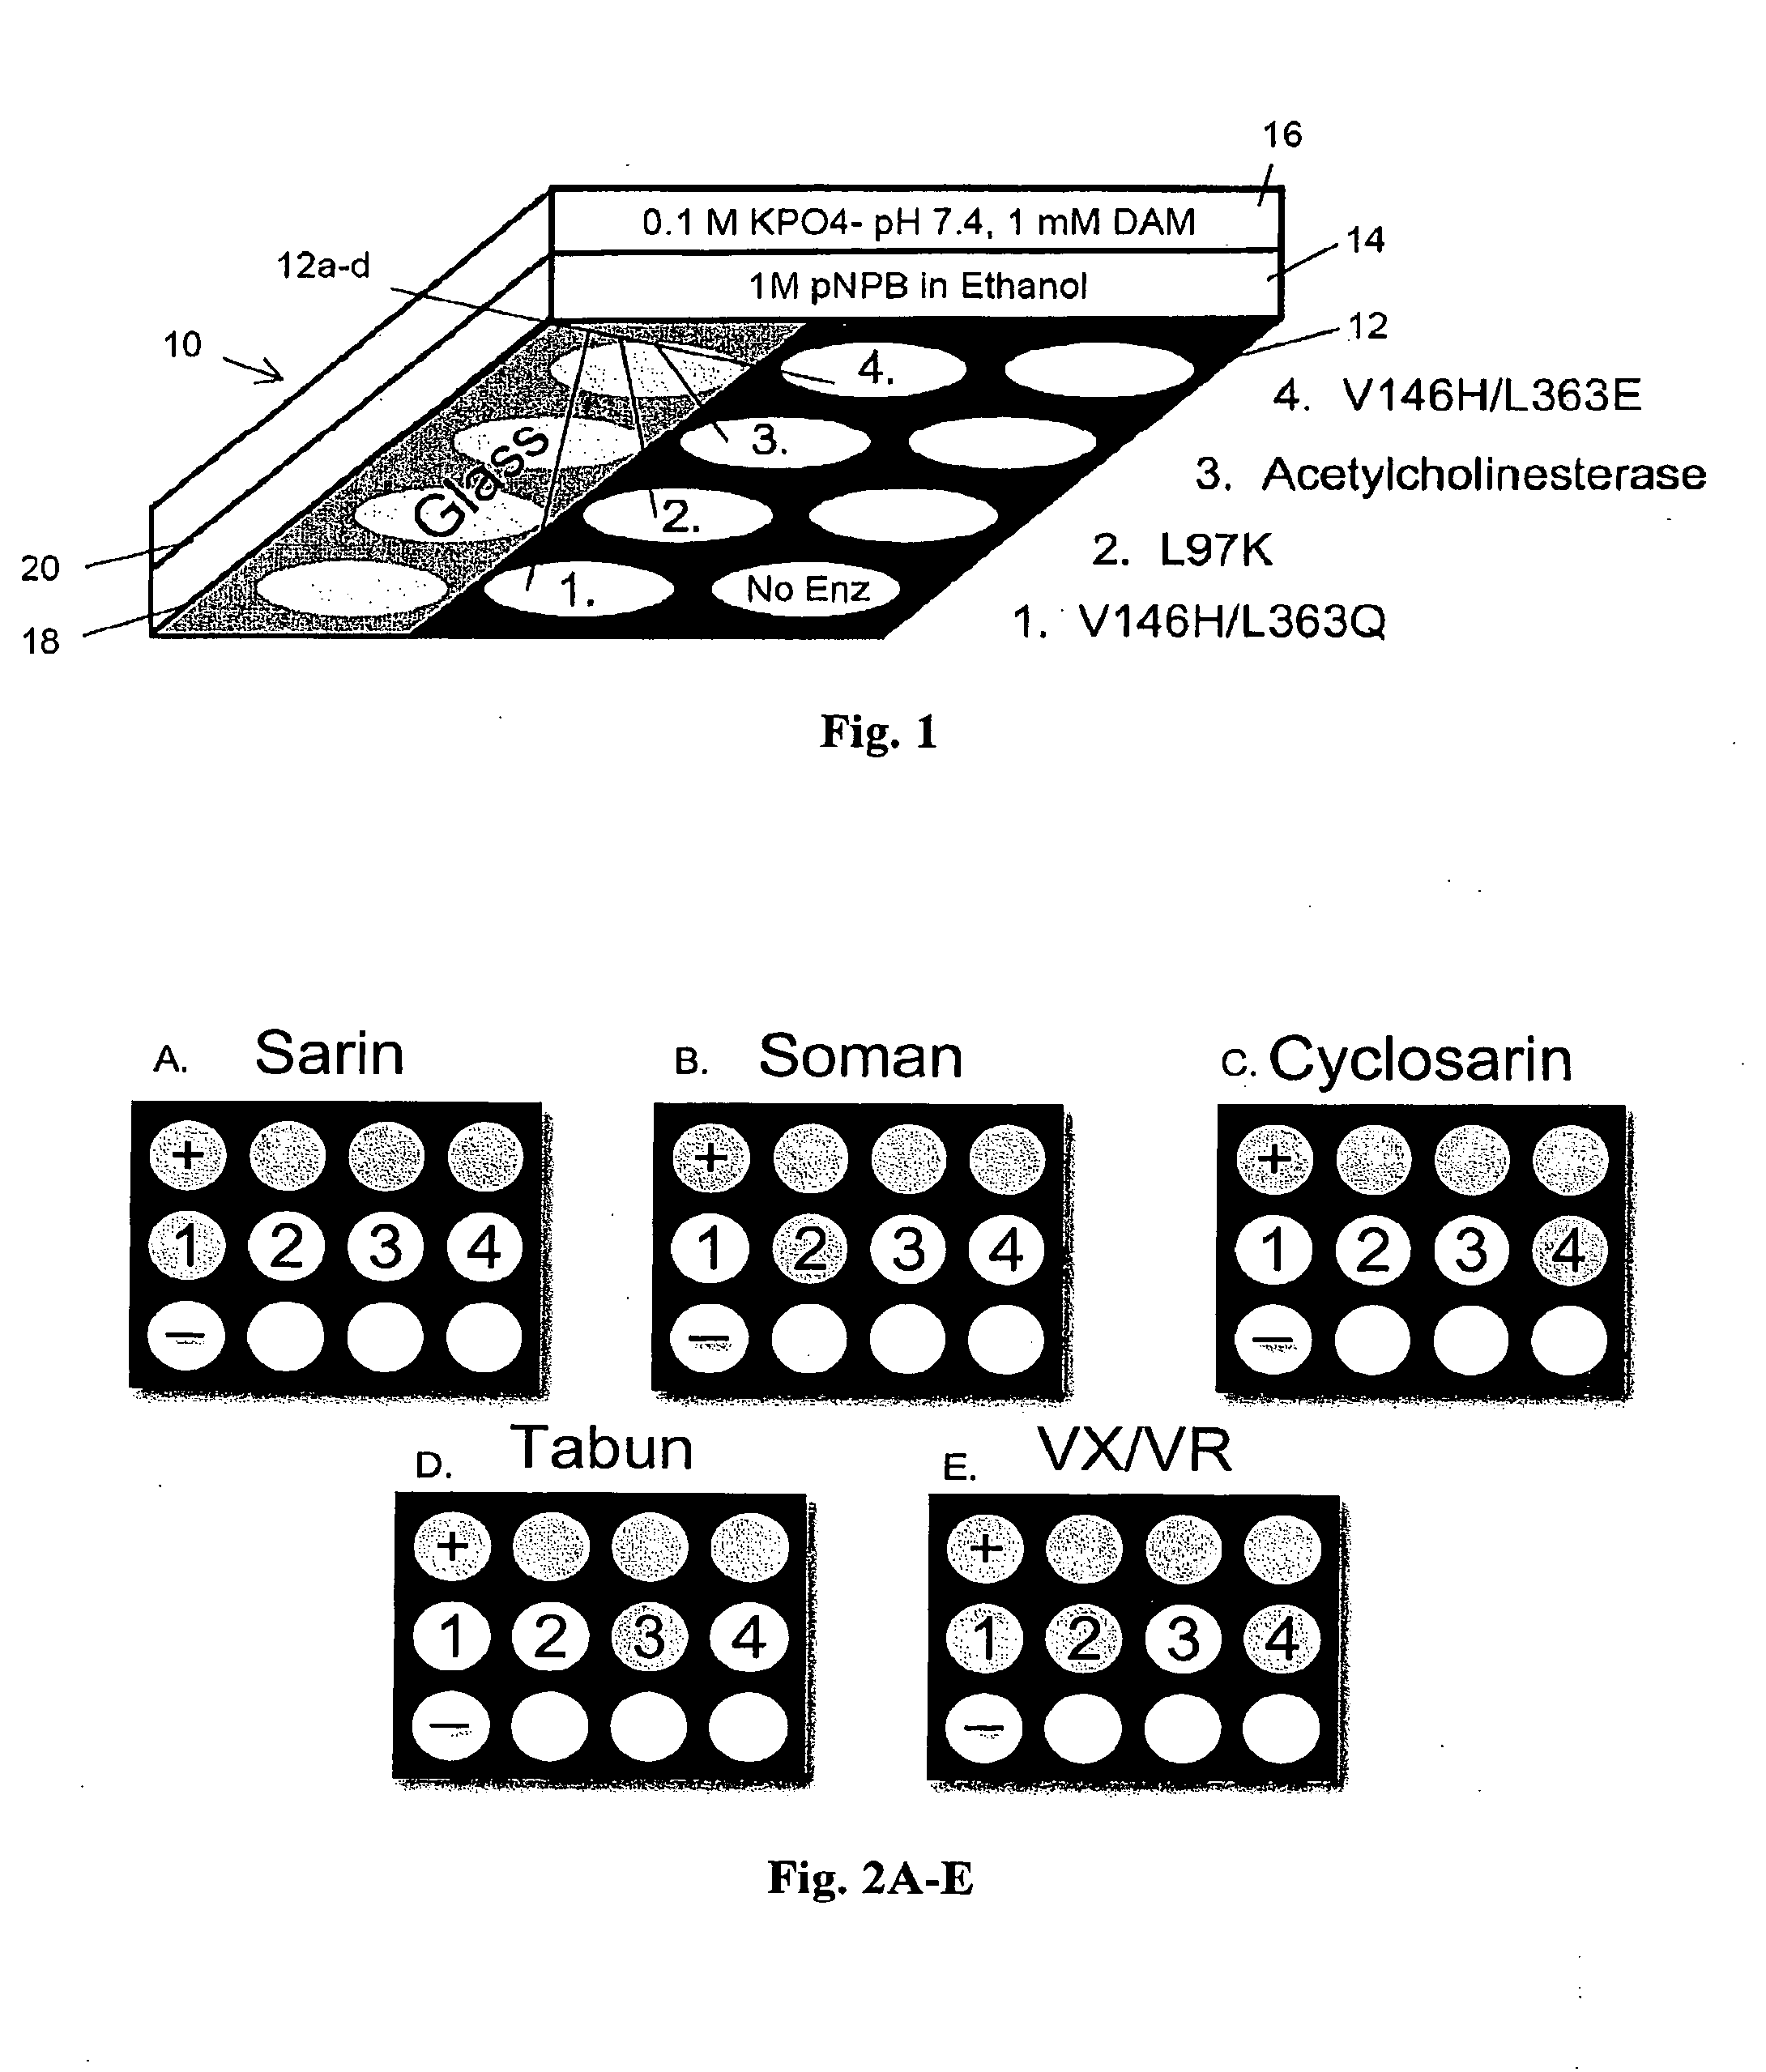 Methods and Compositions for Detection and Identification of Organophosphorus Nerve Agents, Pesticides and Other Toxins